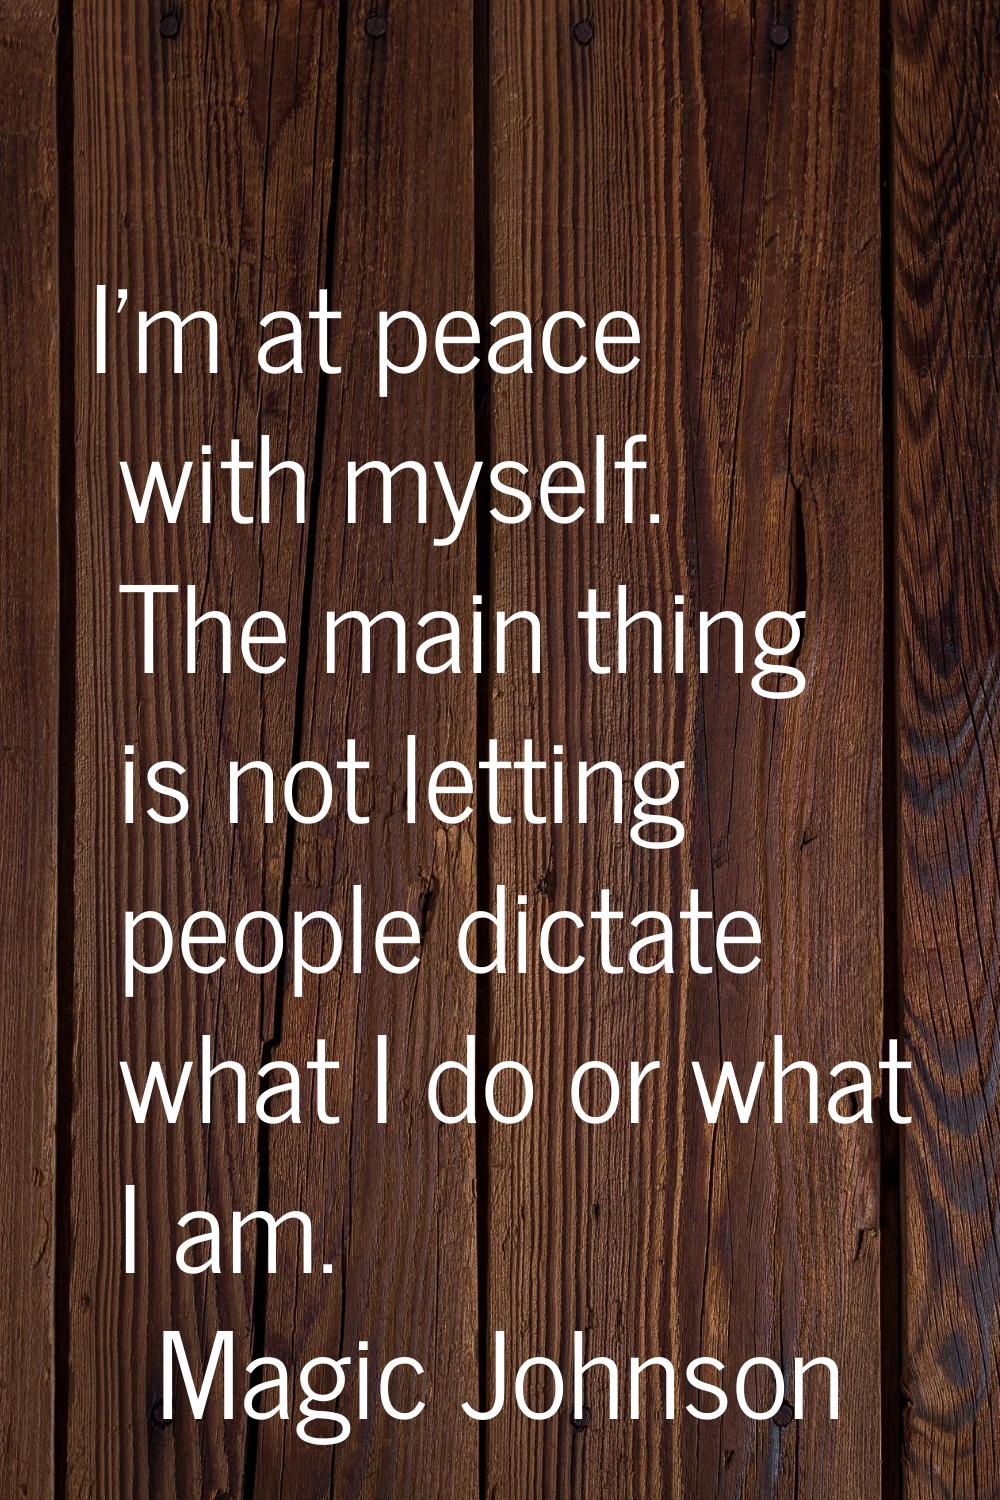 I'm at peace with myself. The main thing is not letting people dictate what I do or what I am.